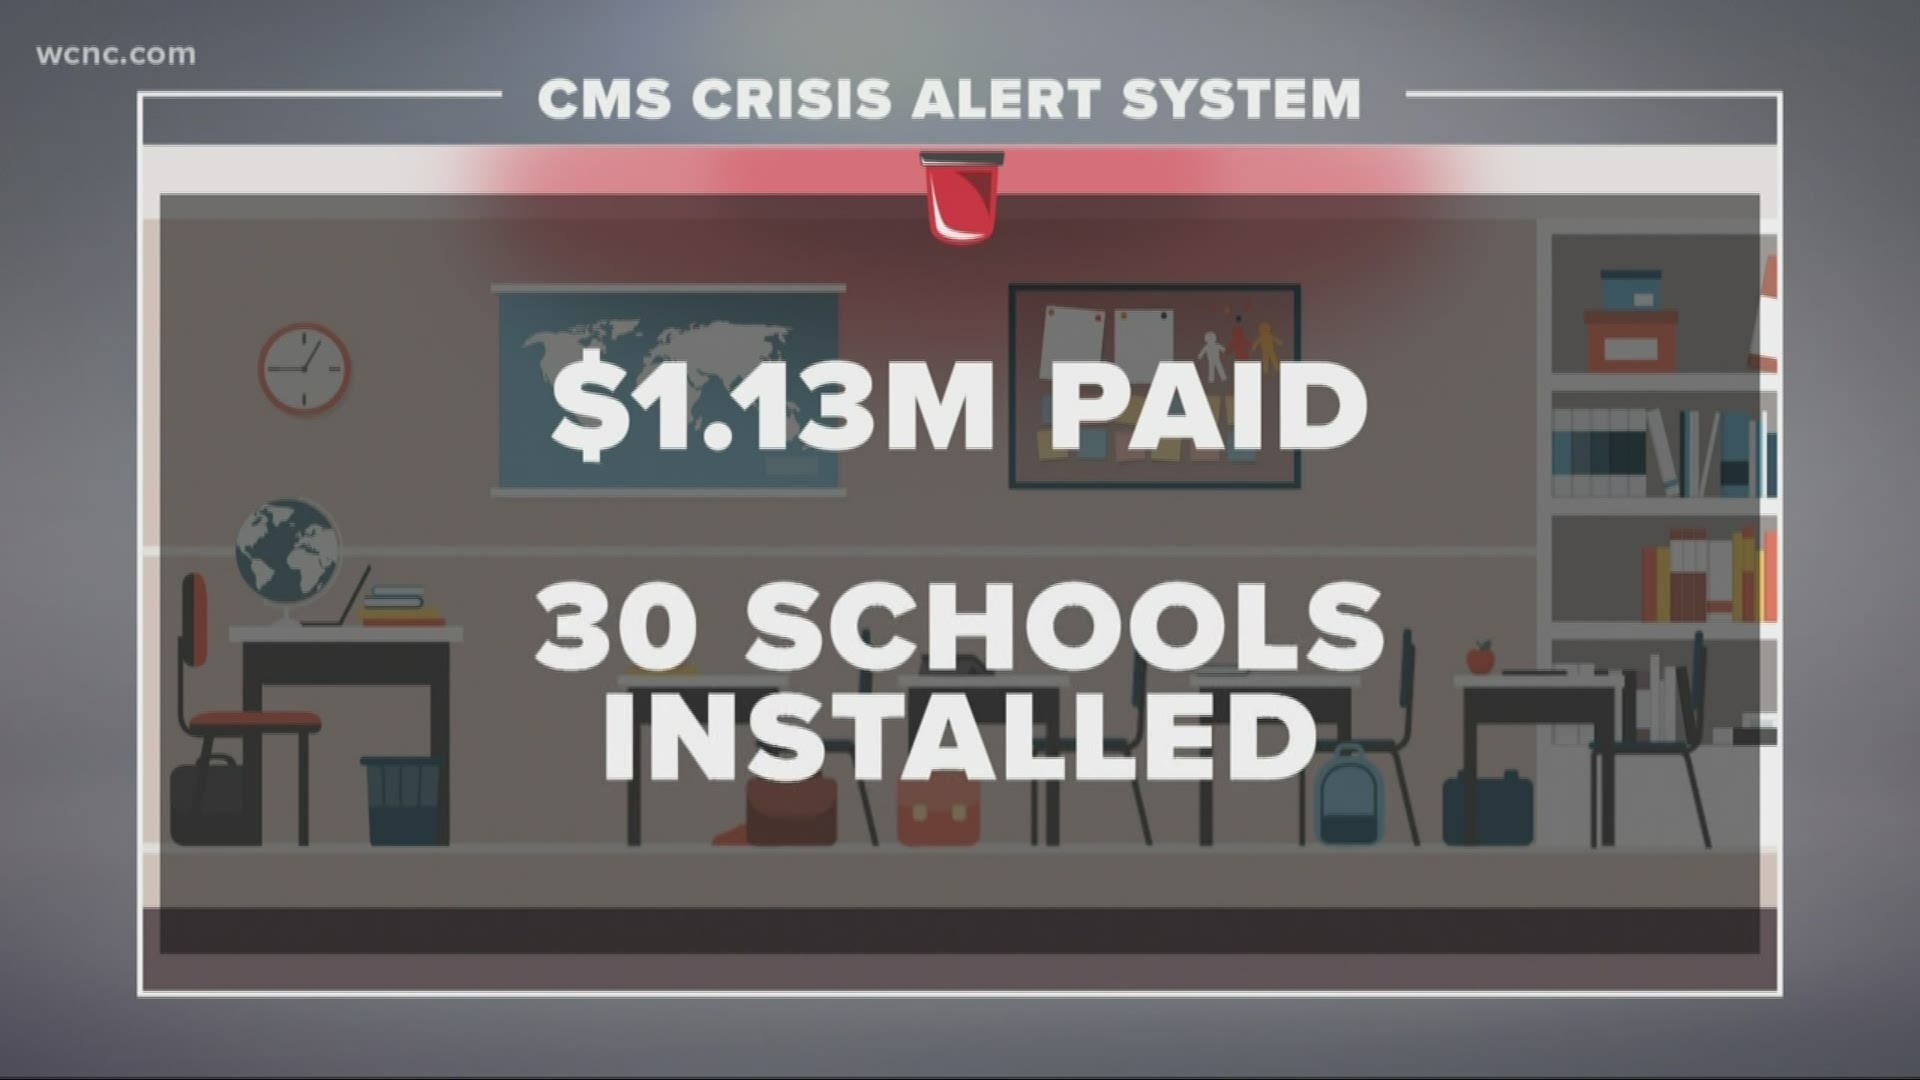 It comes a few weeks after the district revealed the million-dollar crisis system was broken, and just hours after the company said they fixed the problem.